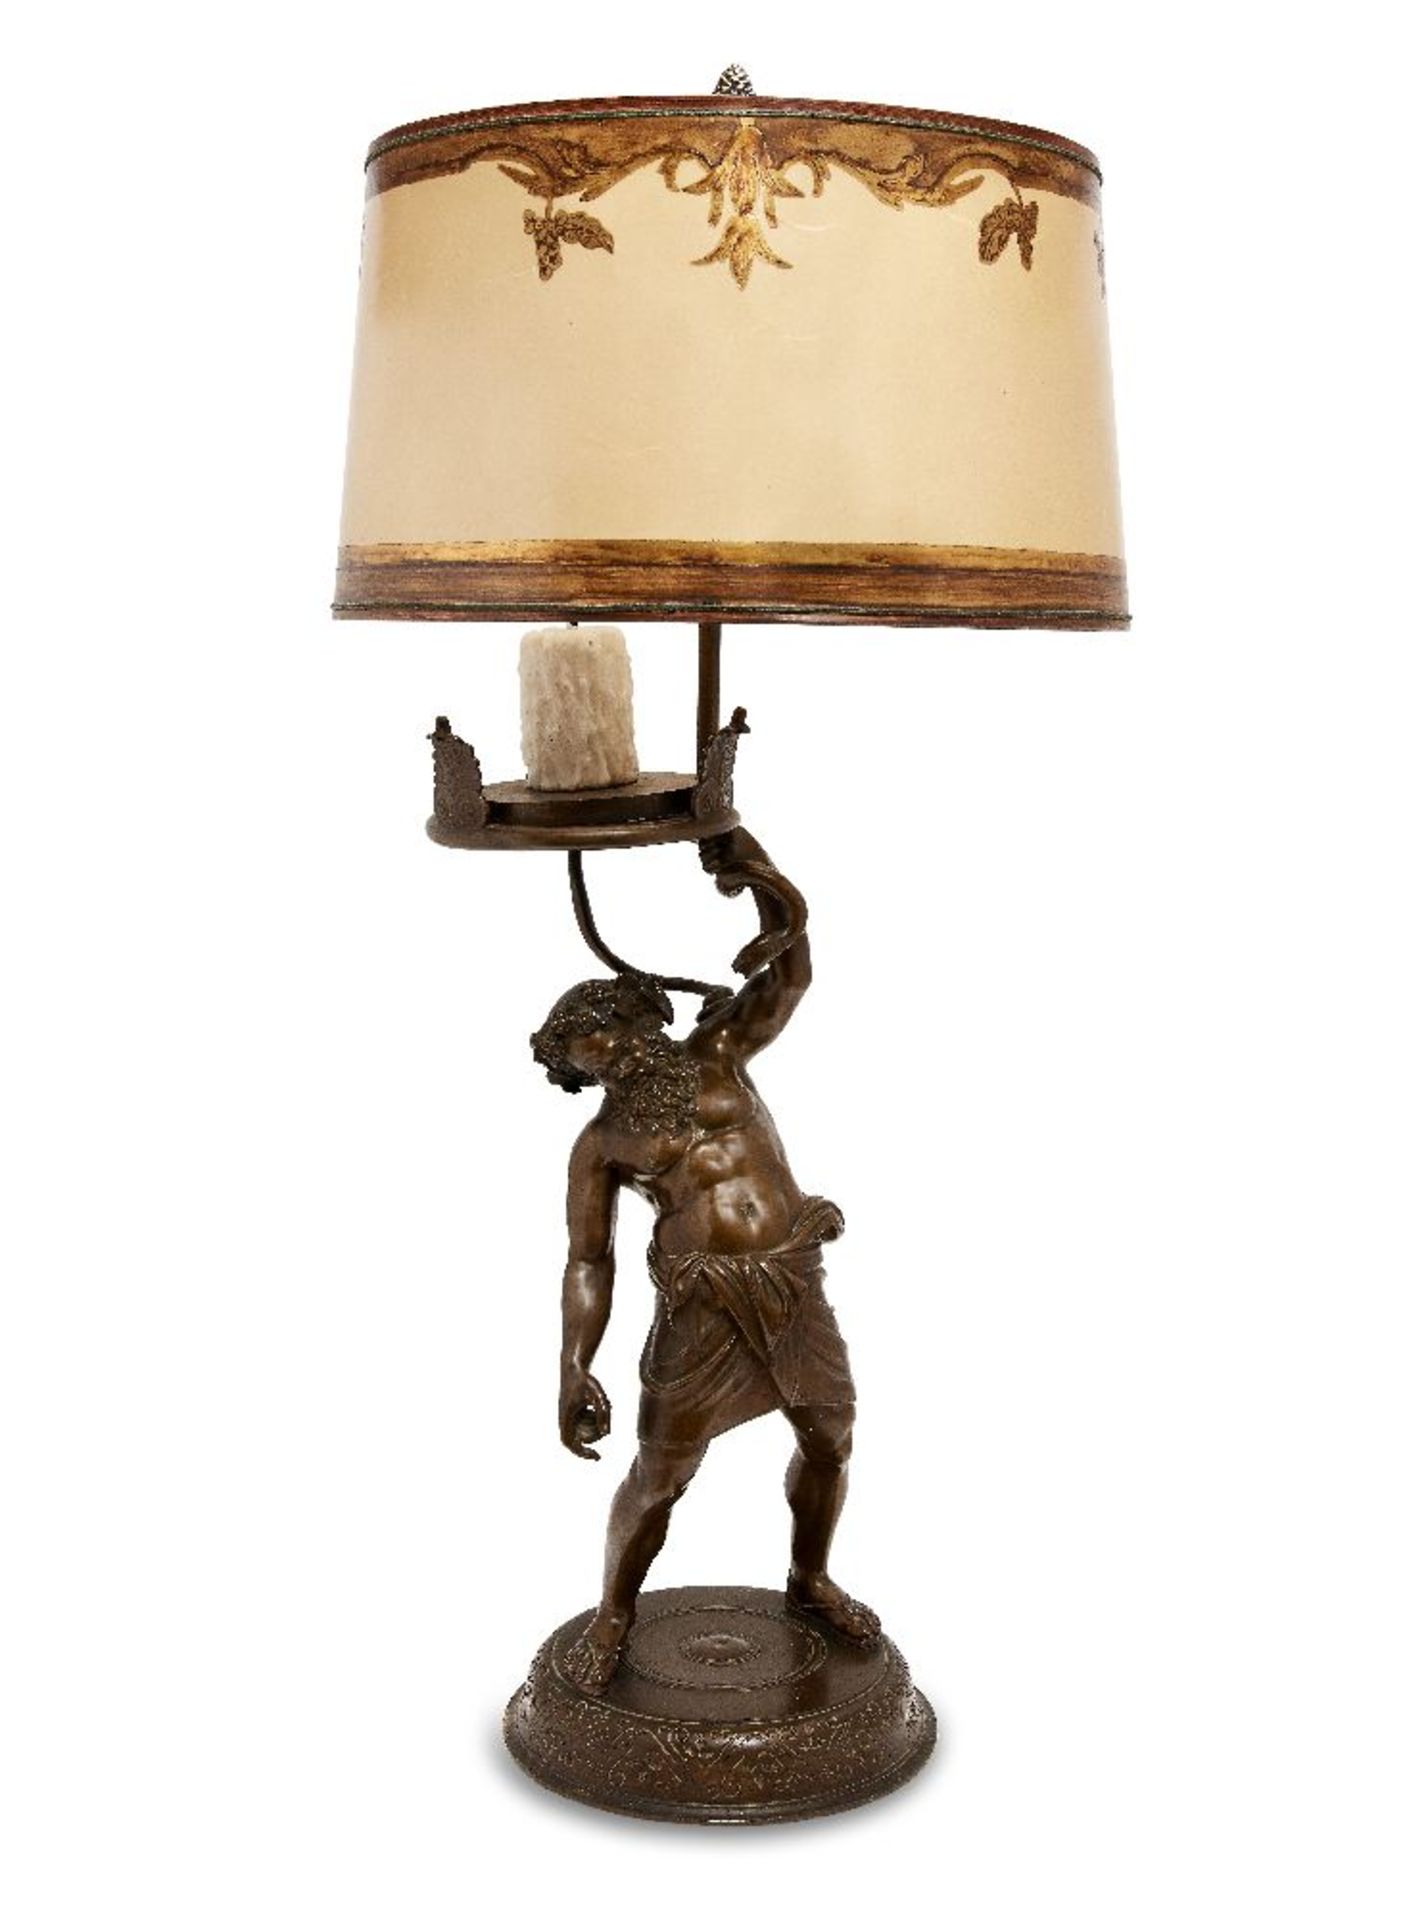 An Italian bronze model of Silenus, c.1900, after the antique, converted to a lamp, 60cm high